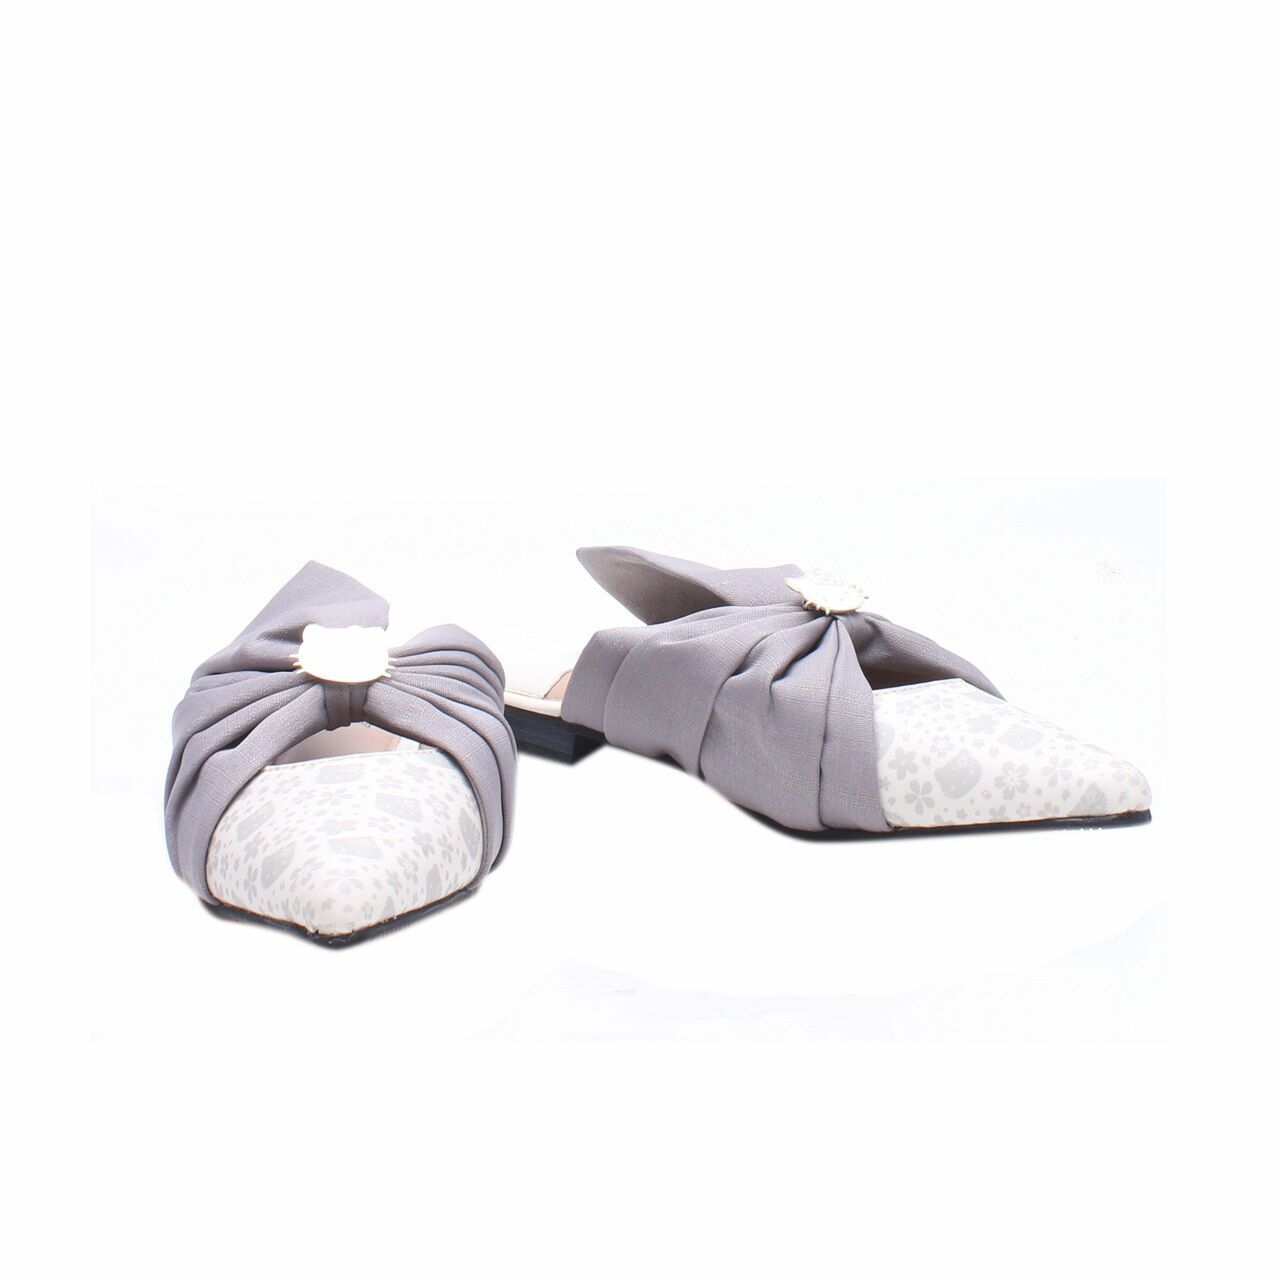 Solesister x Hello Kitty Grey Mules Sandals